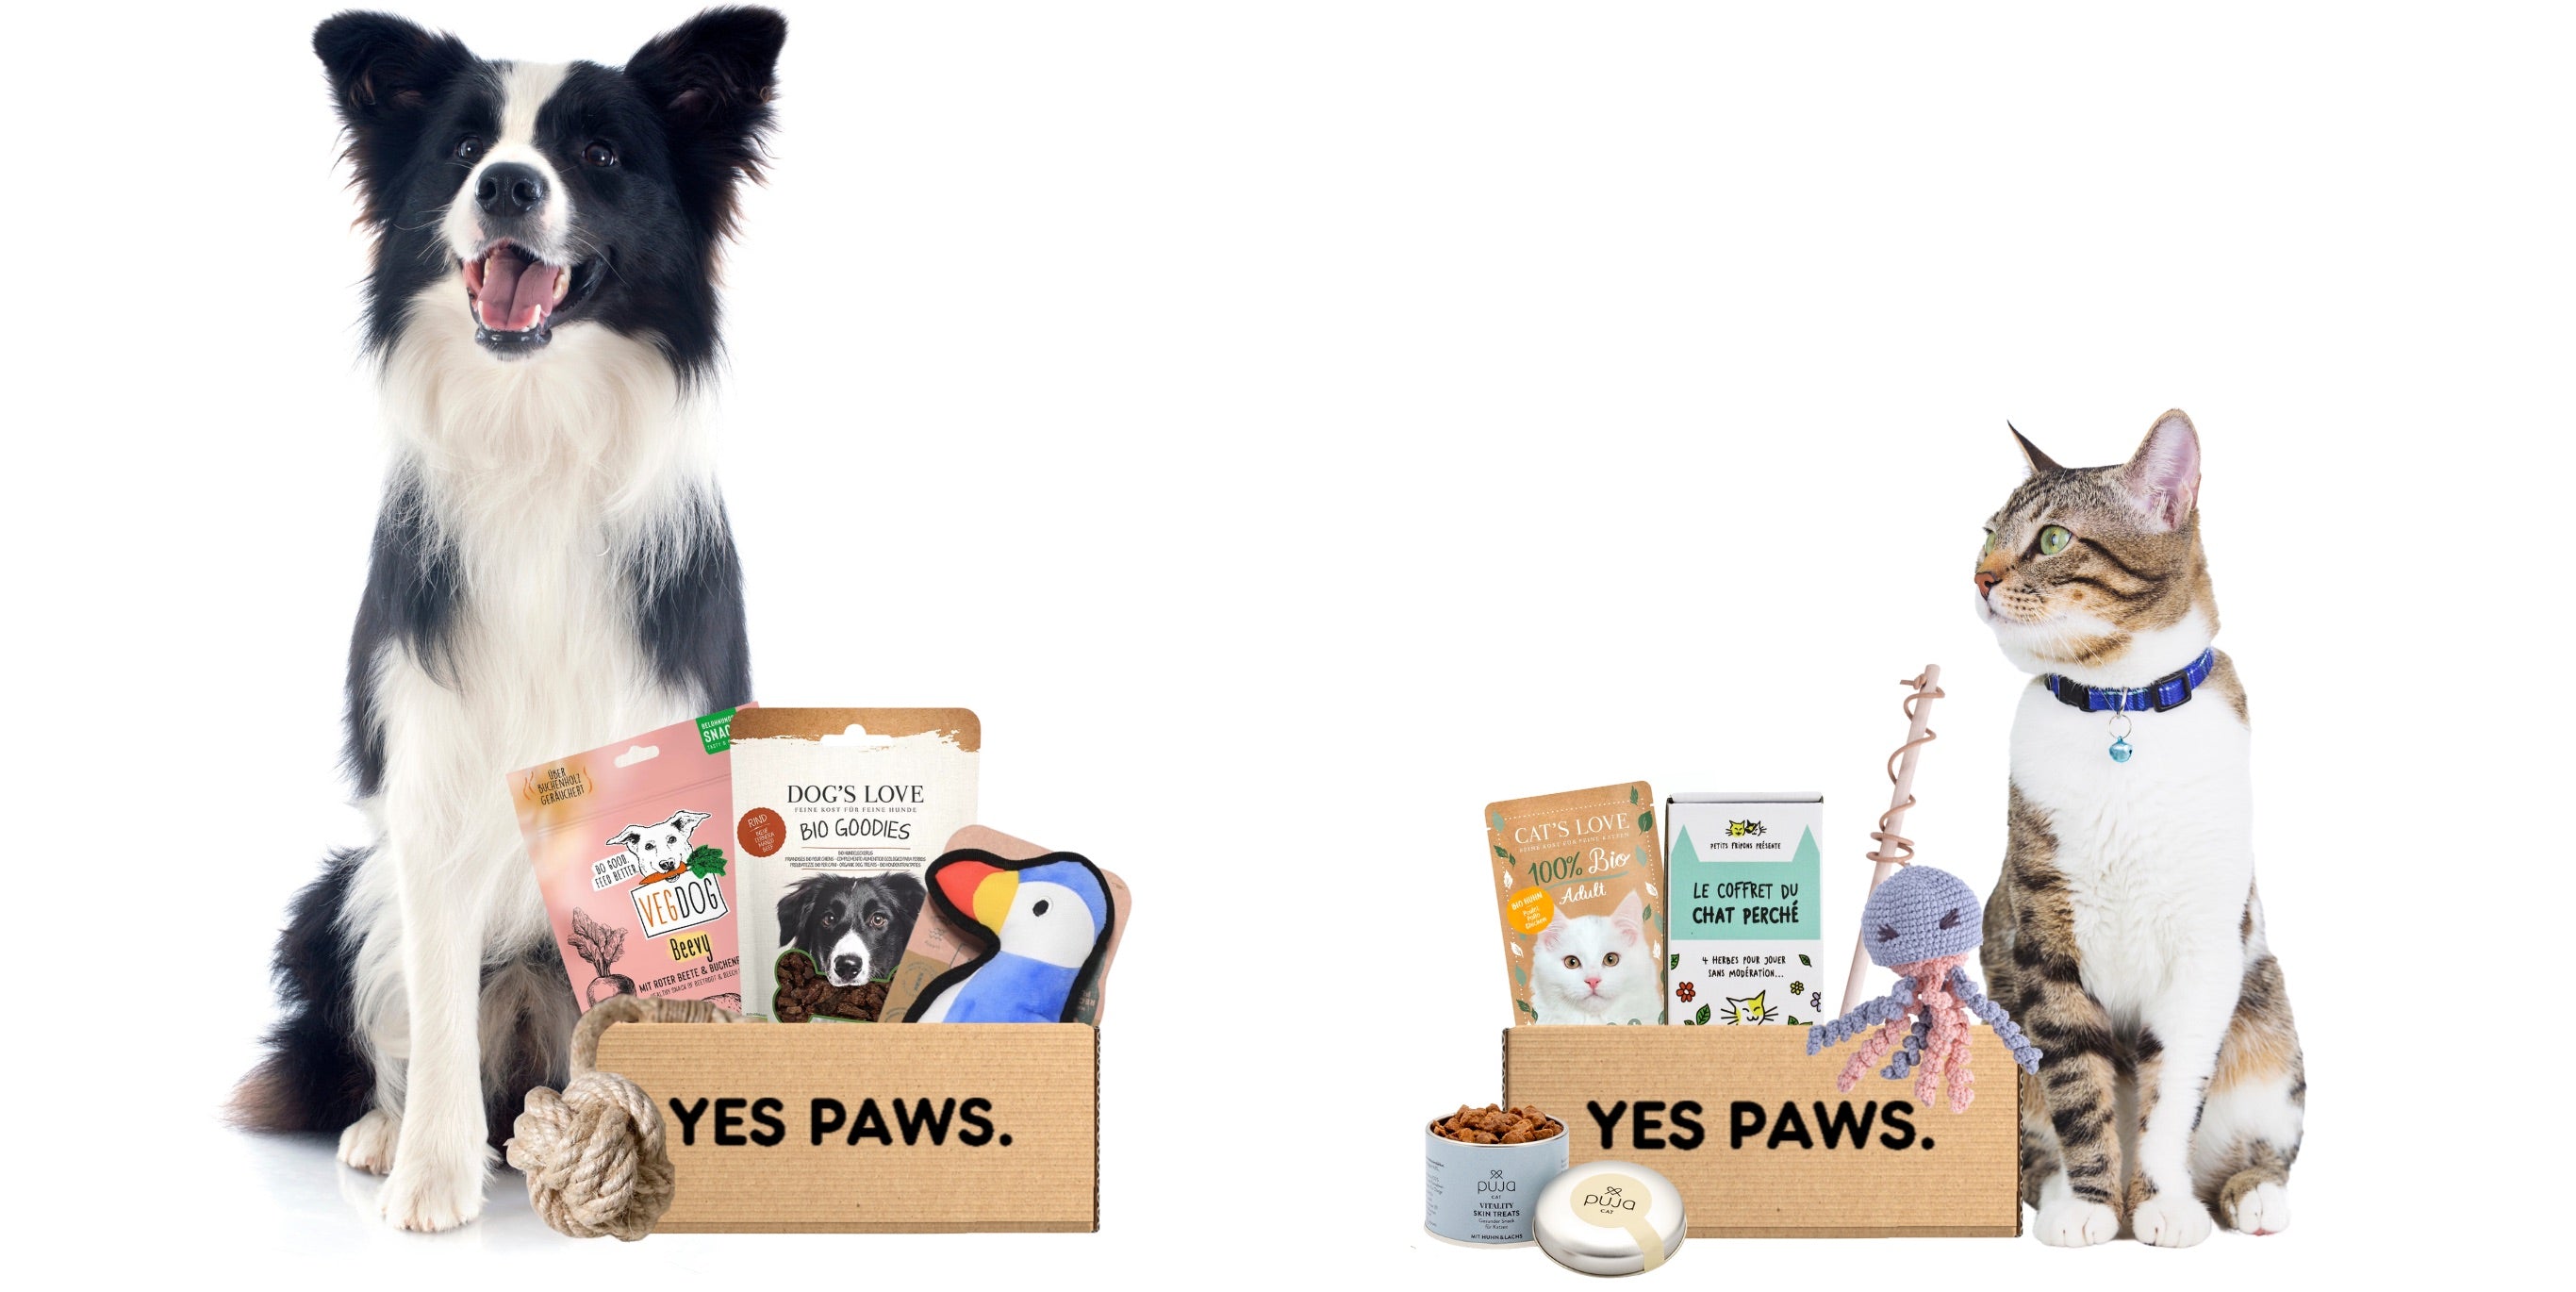 The eco-friendly and natural gift for dogs and cats – YES PAWS.